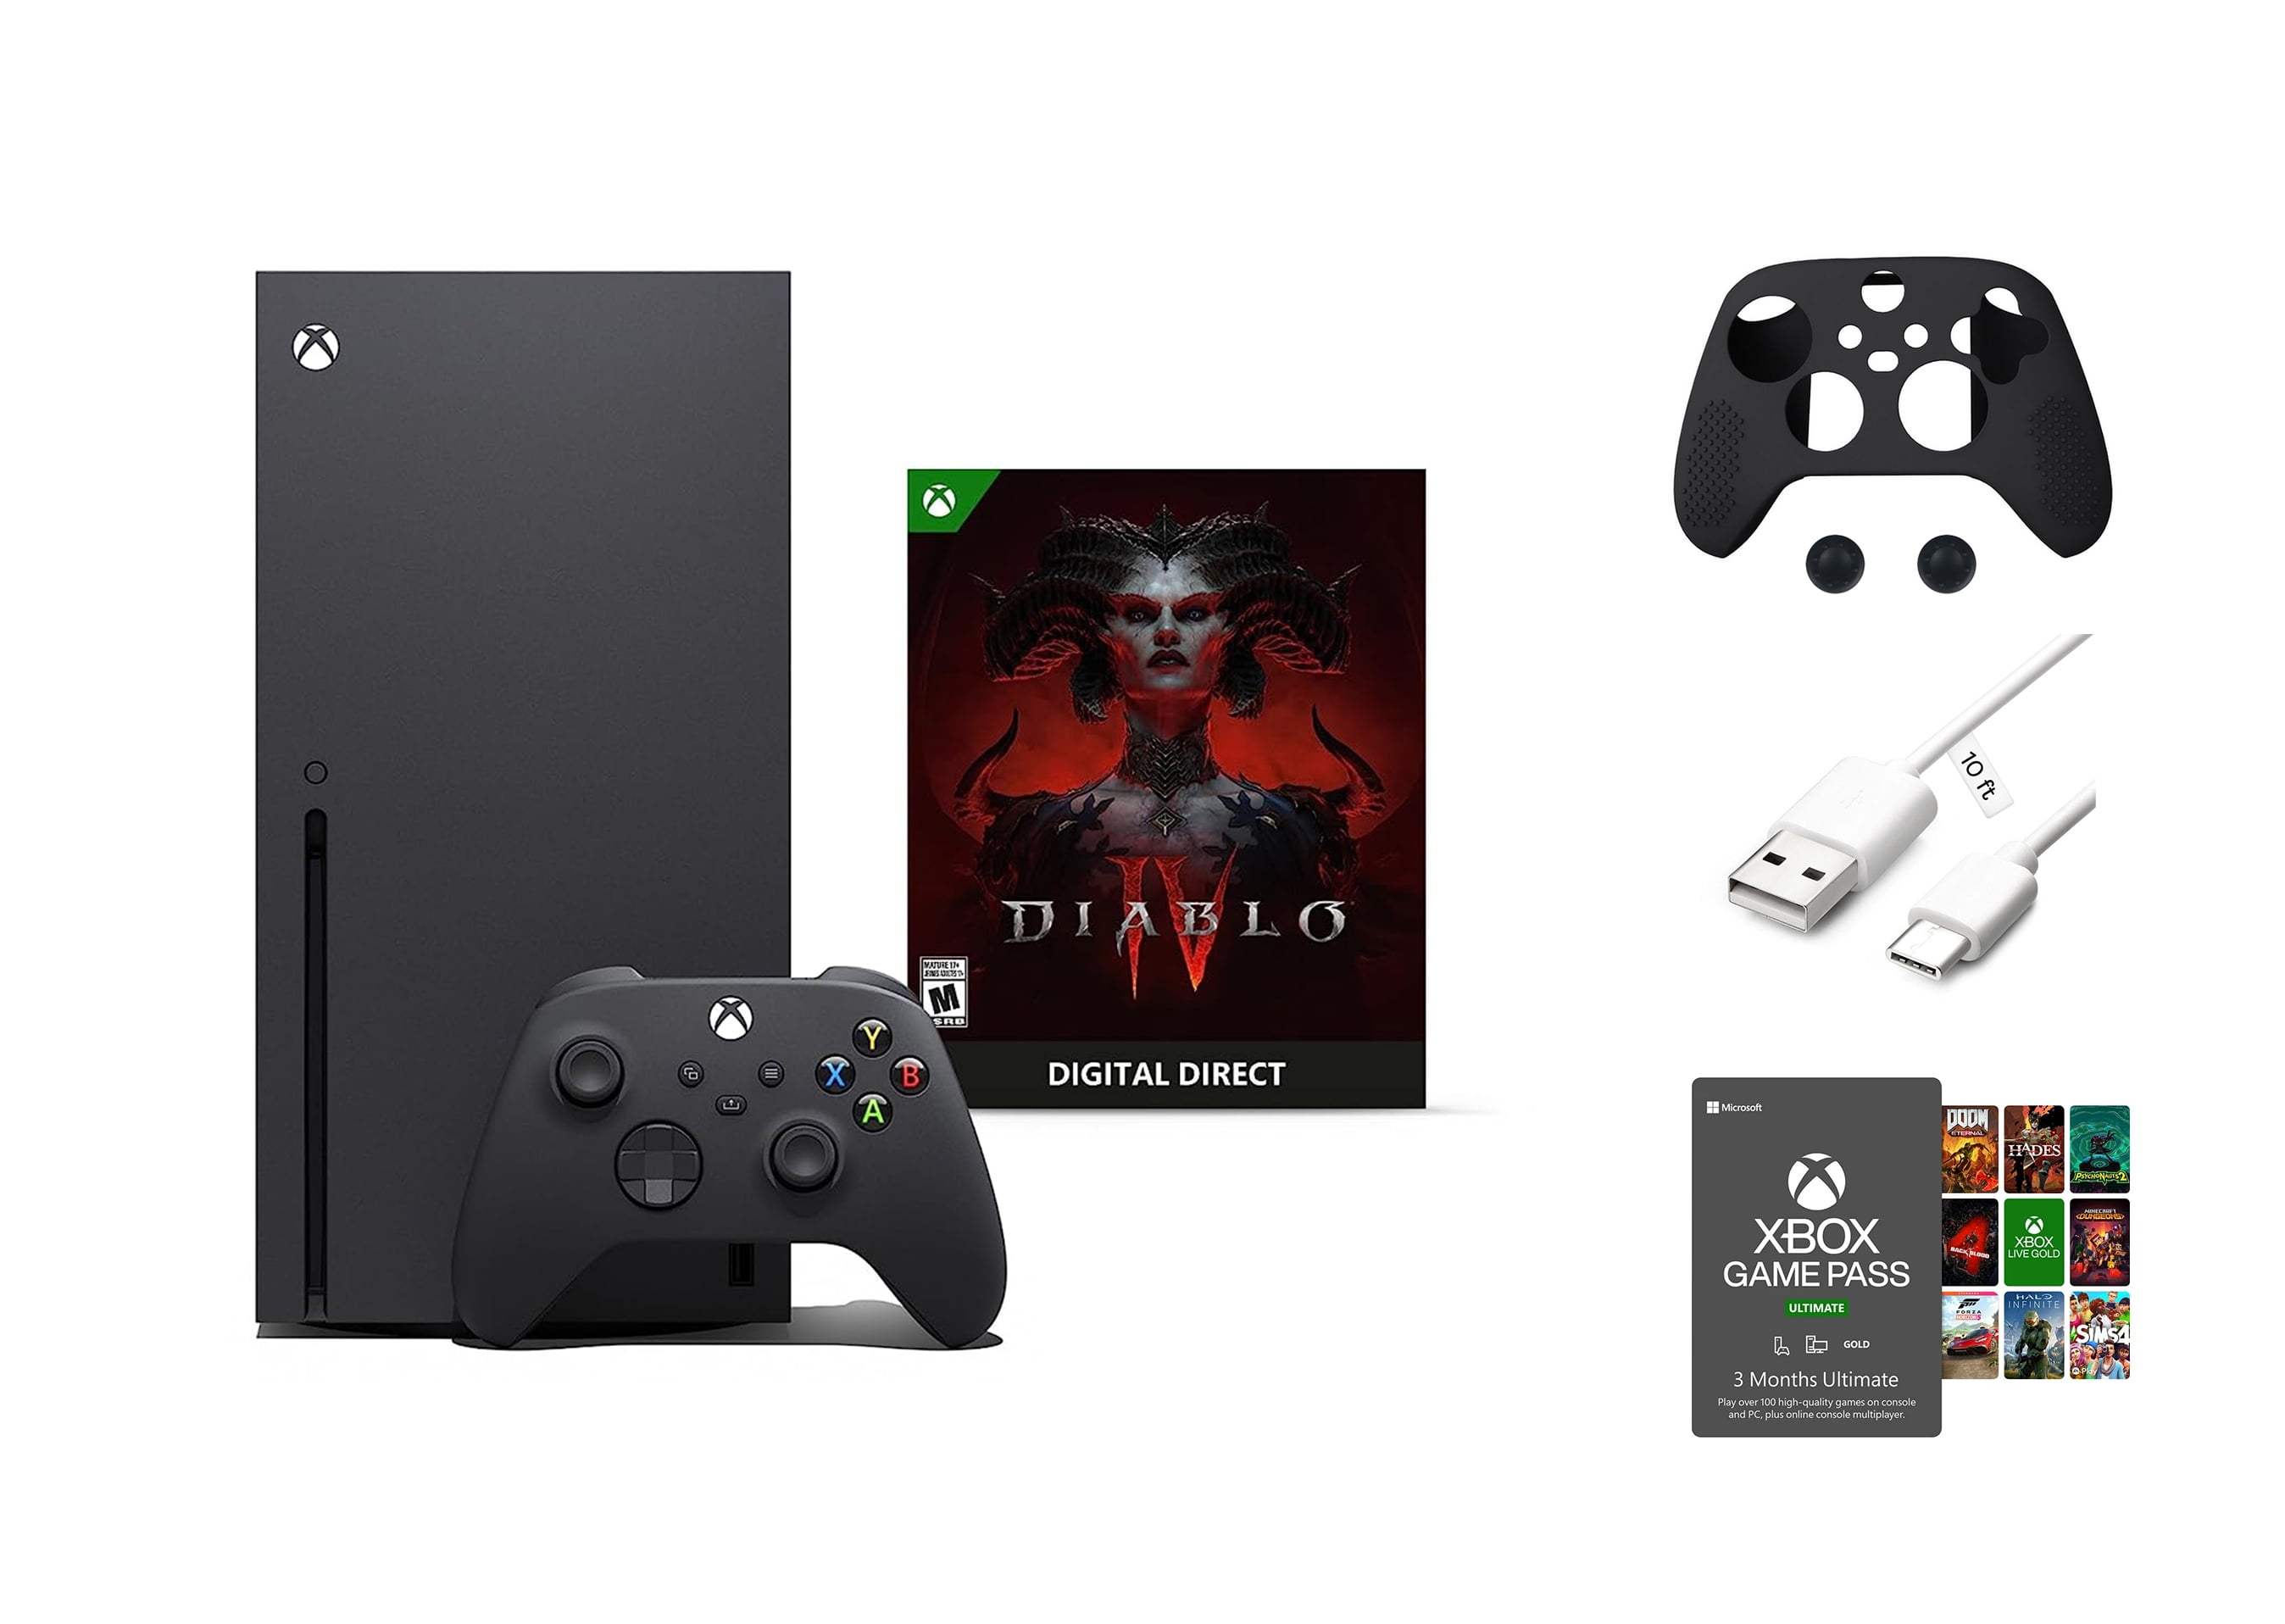 Xbox drops major new console and free download bundle in time for Christmas